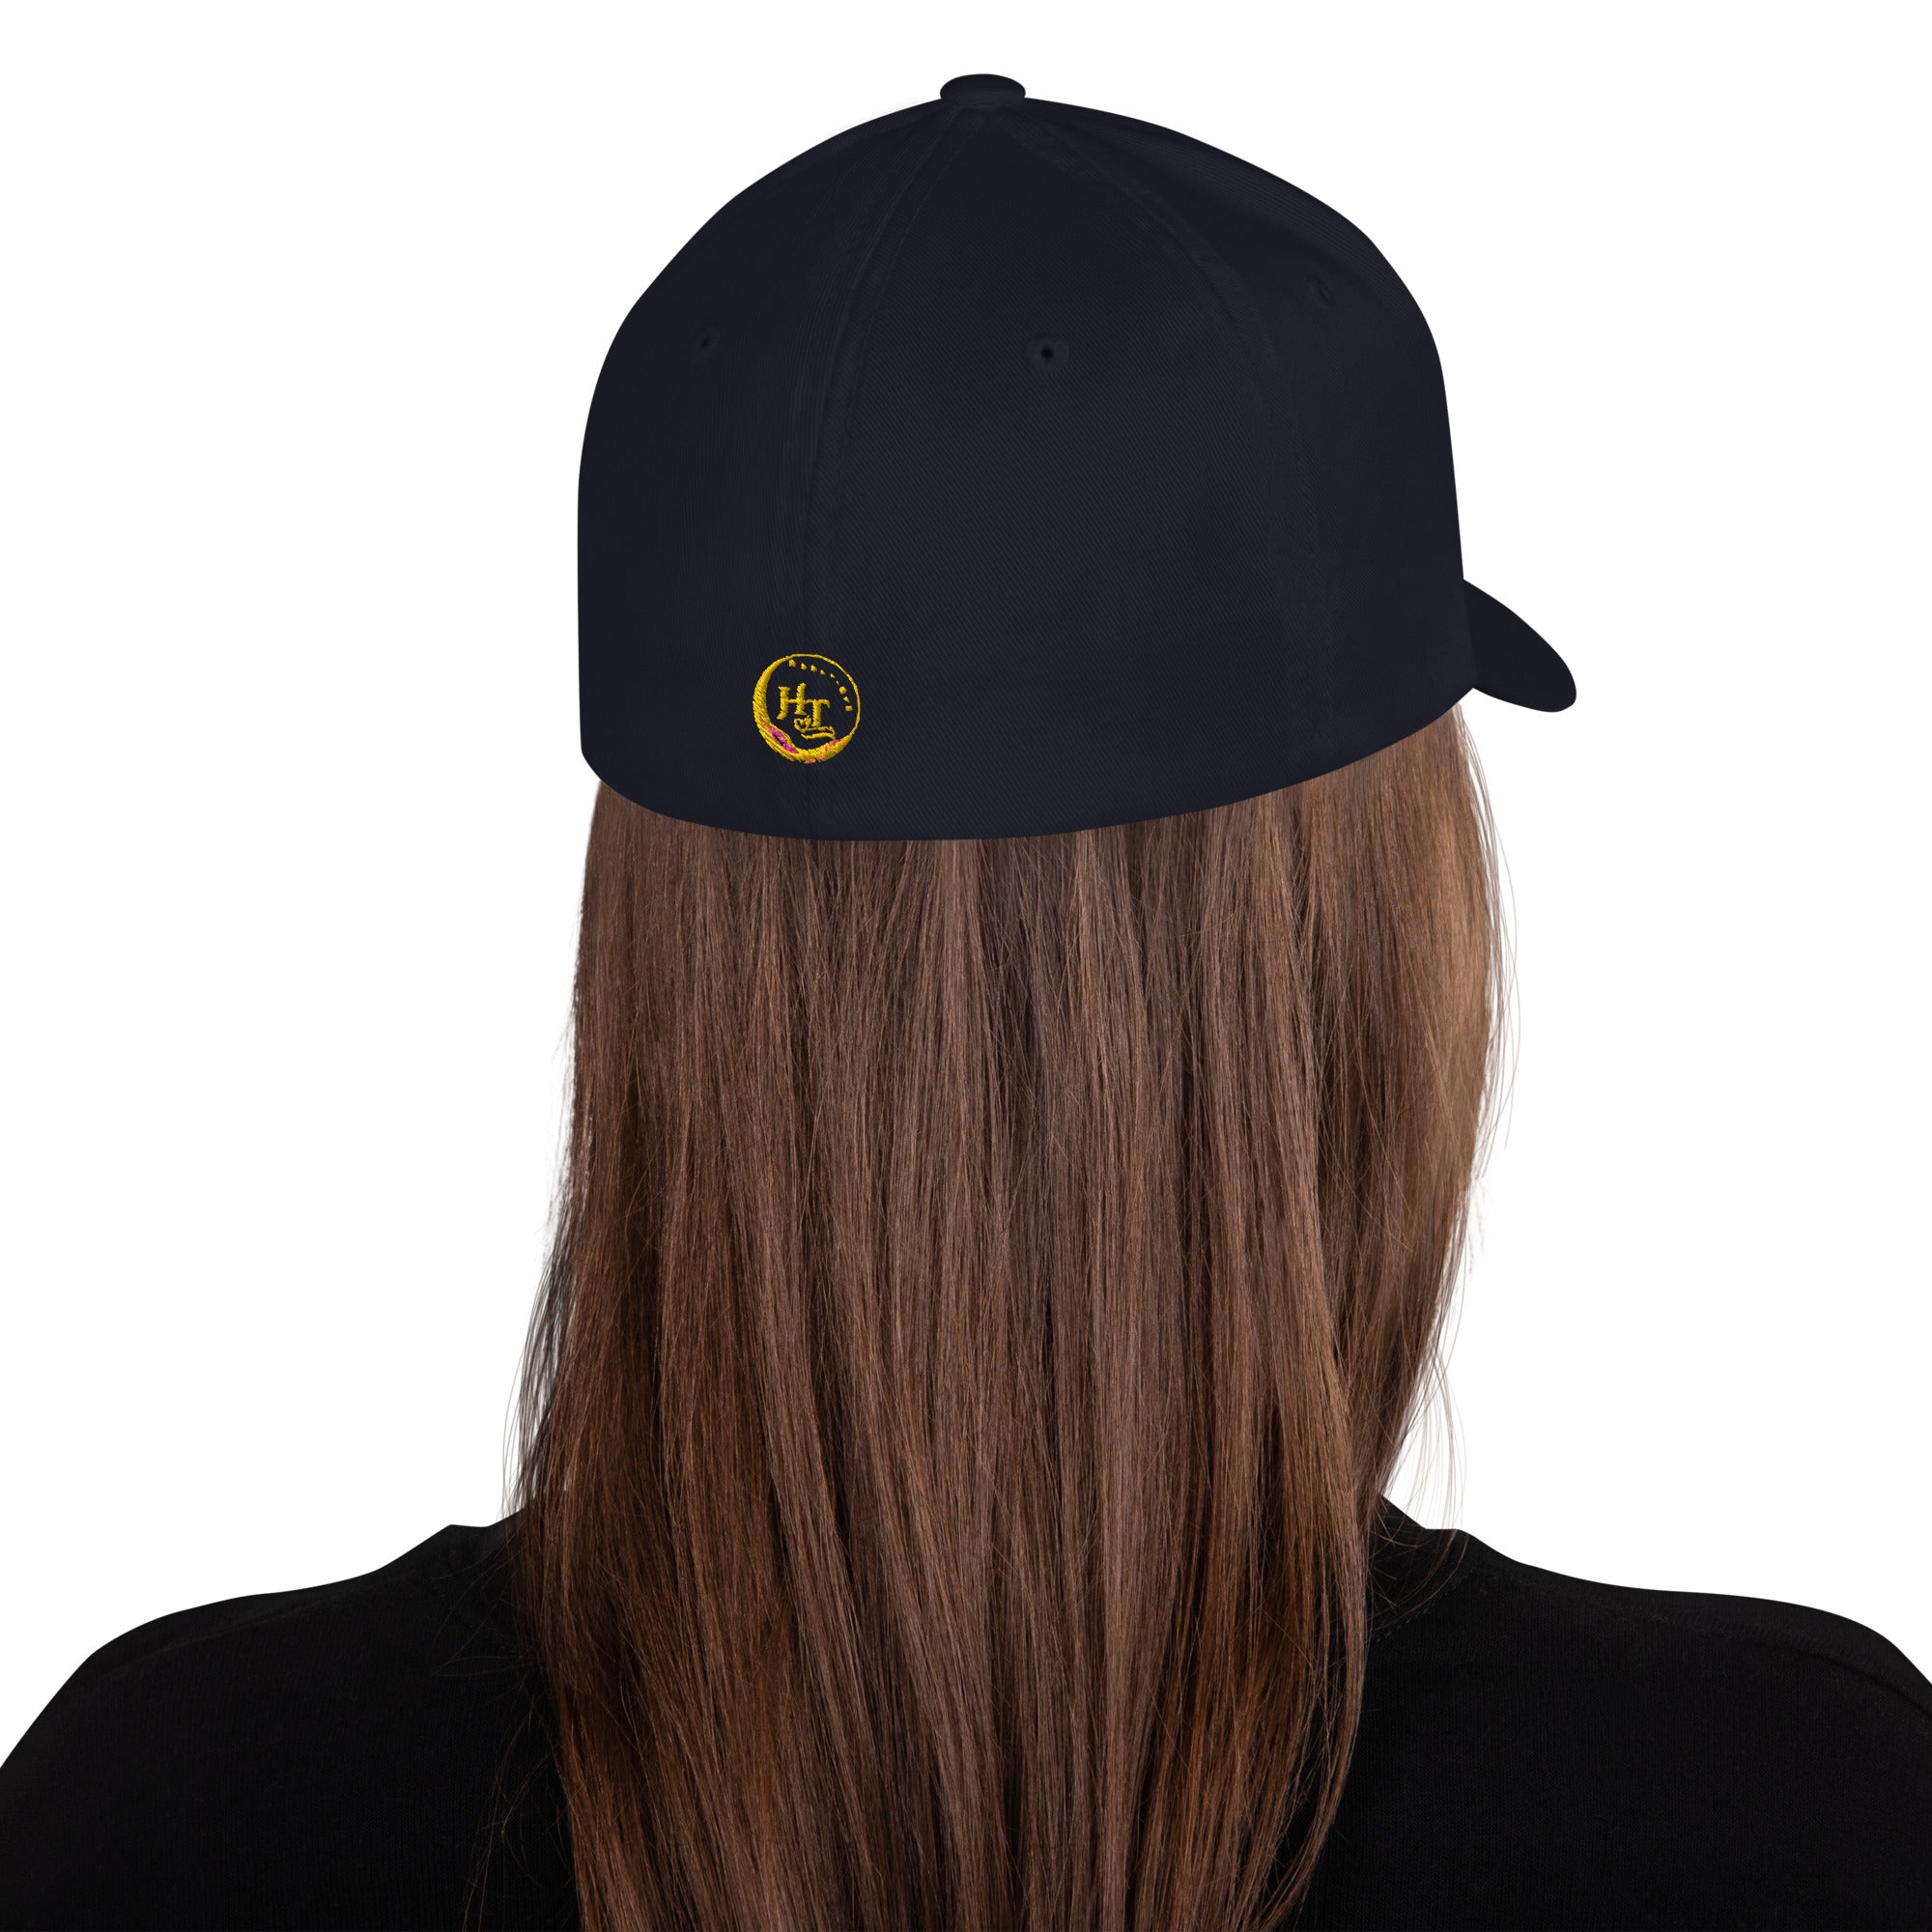 Follow Your Heart Structured Twill Cap